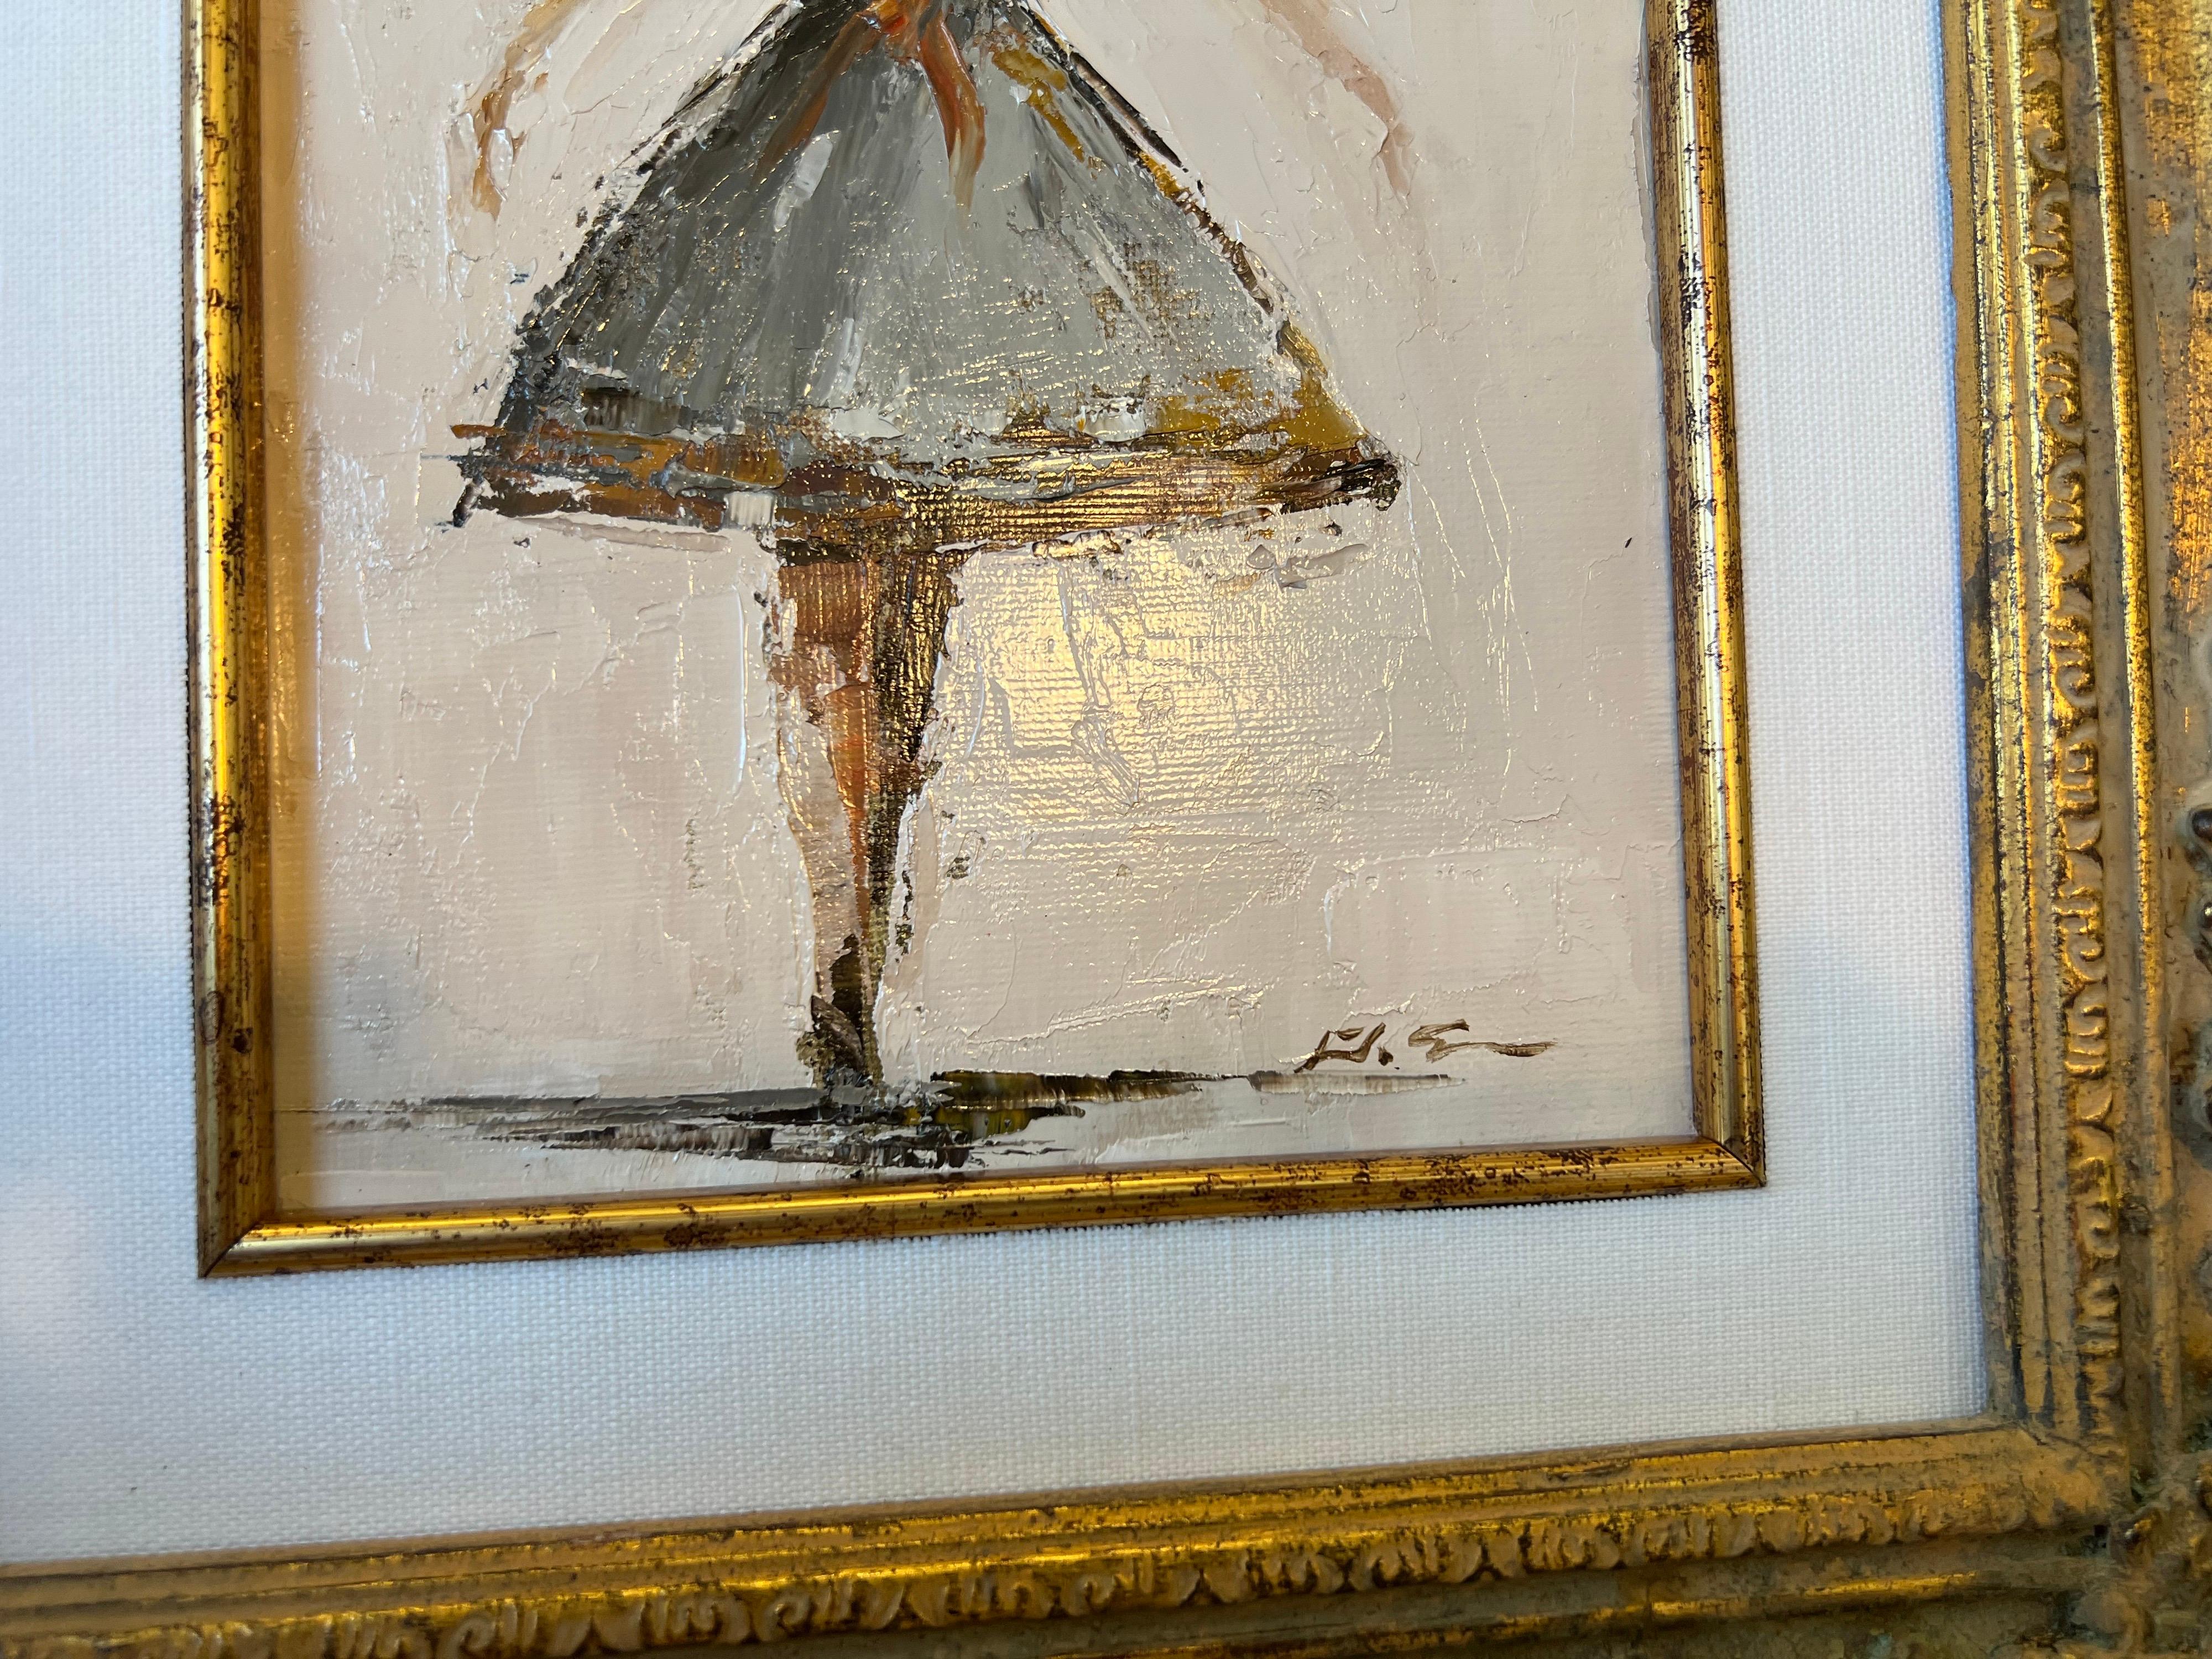 Pose by Geri Eubanks, Petite Figure Impressionist Oil Painting in Antique Frame 3